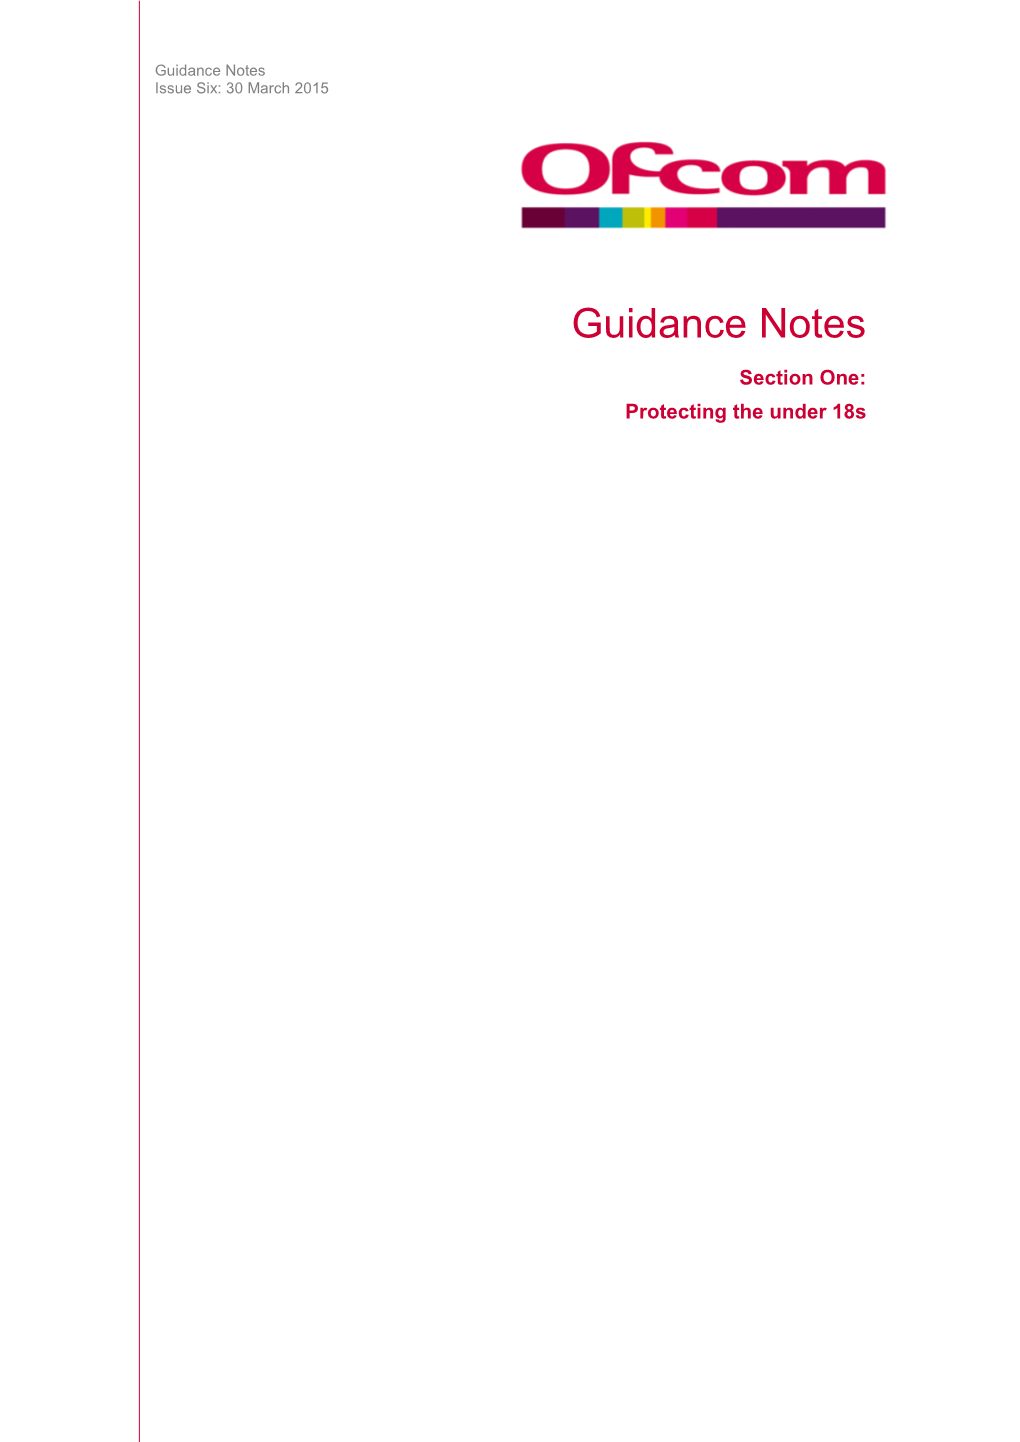 Guidance Notes: Section